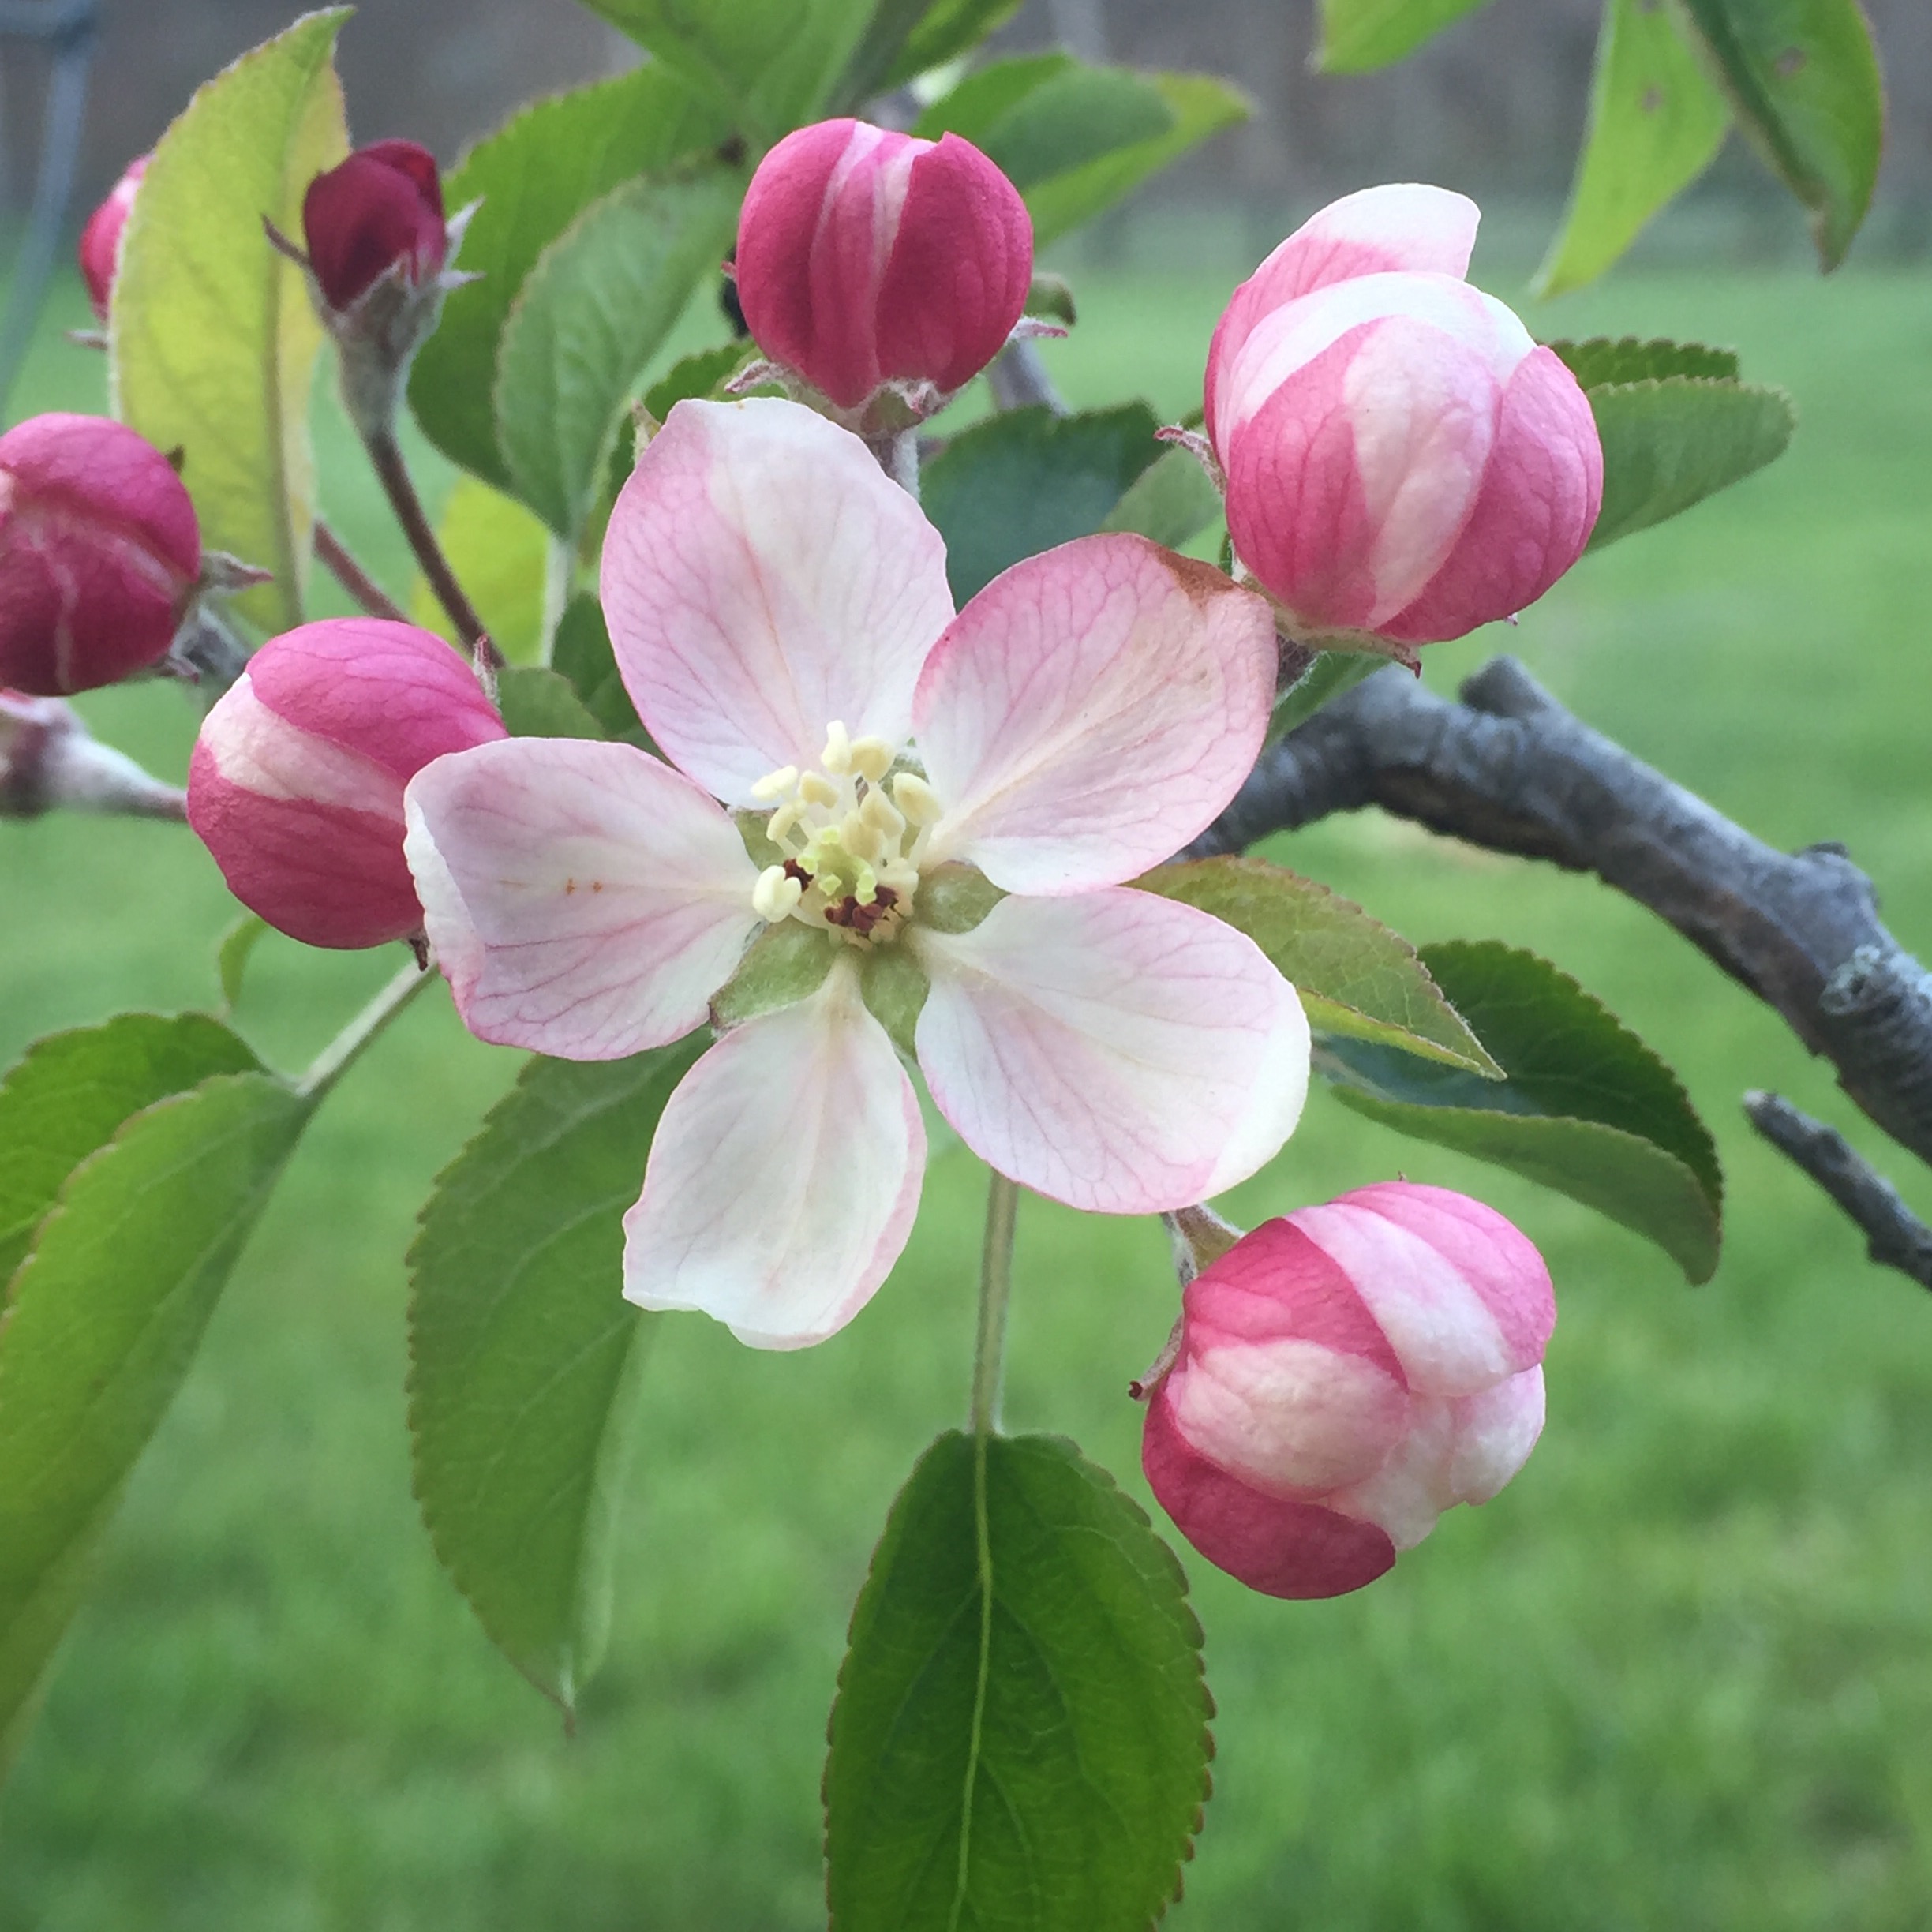 Spring Apple Blossoms